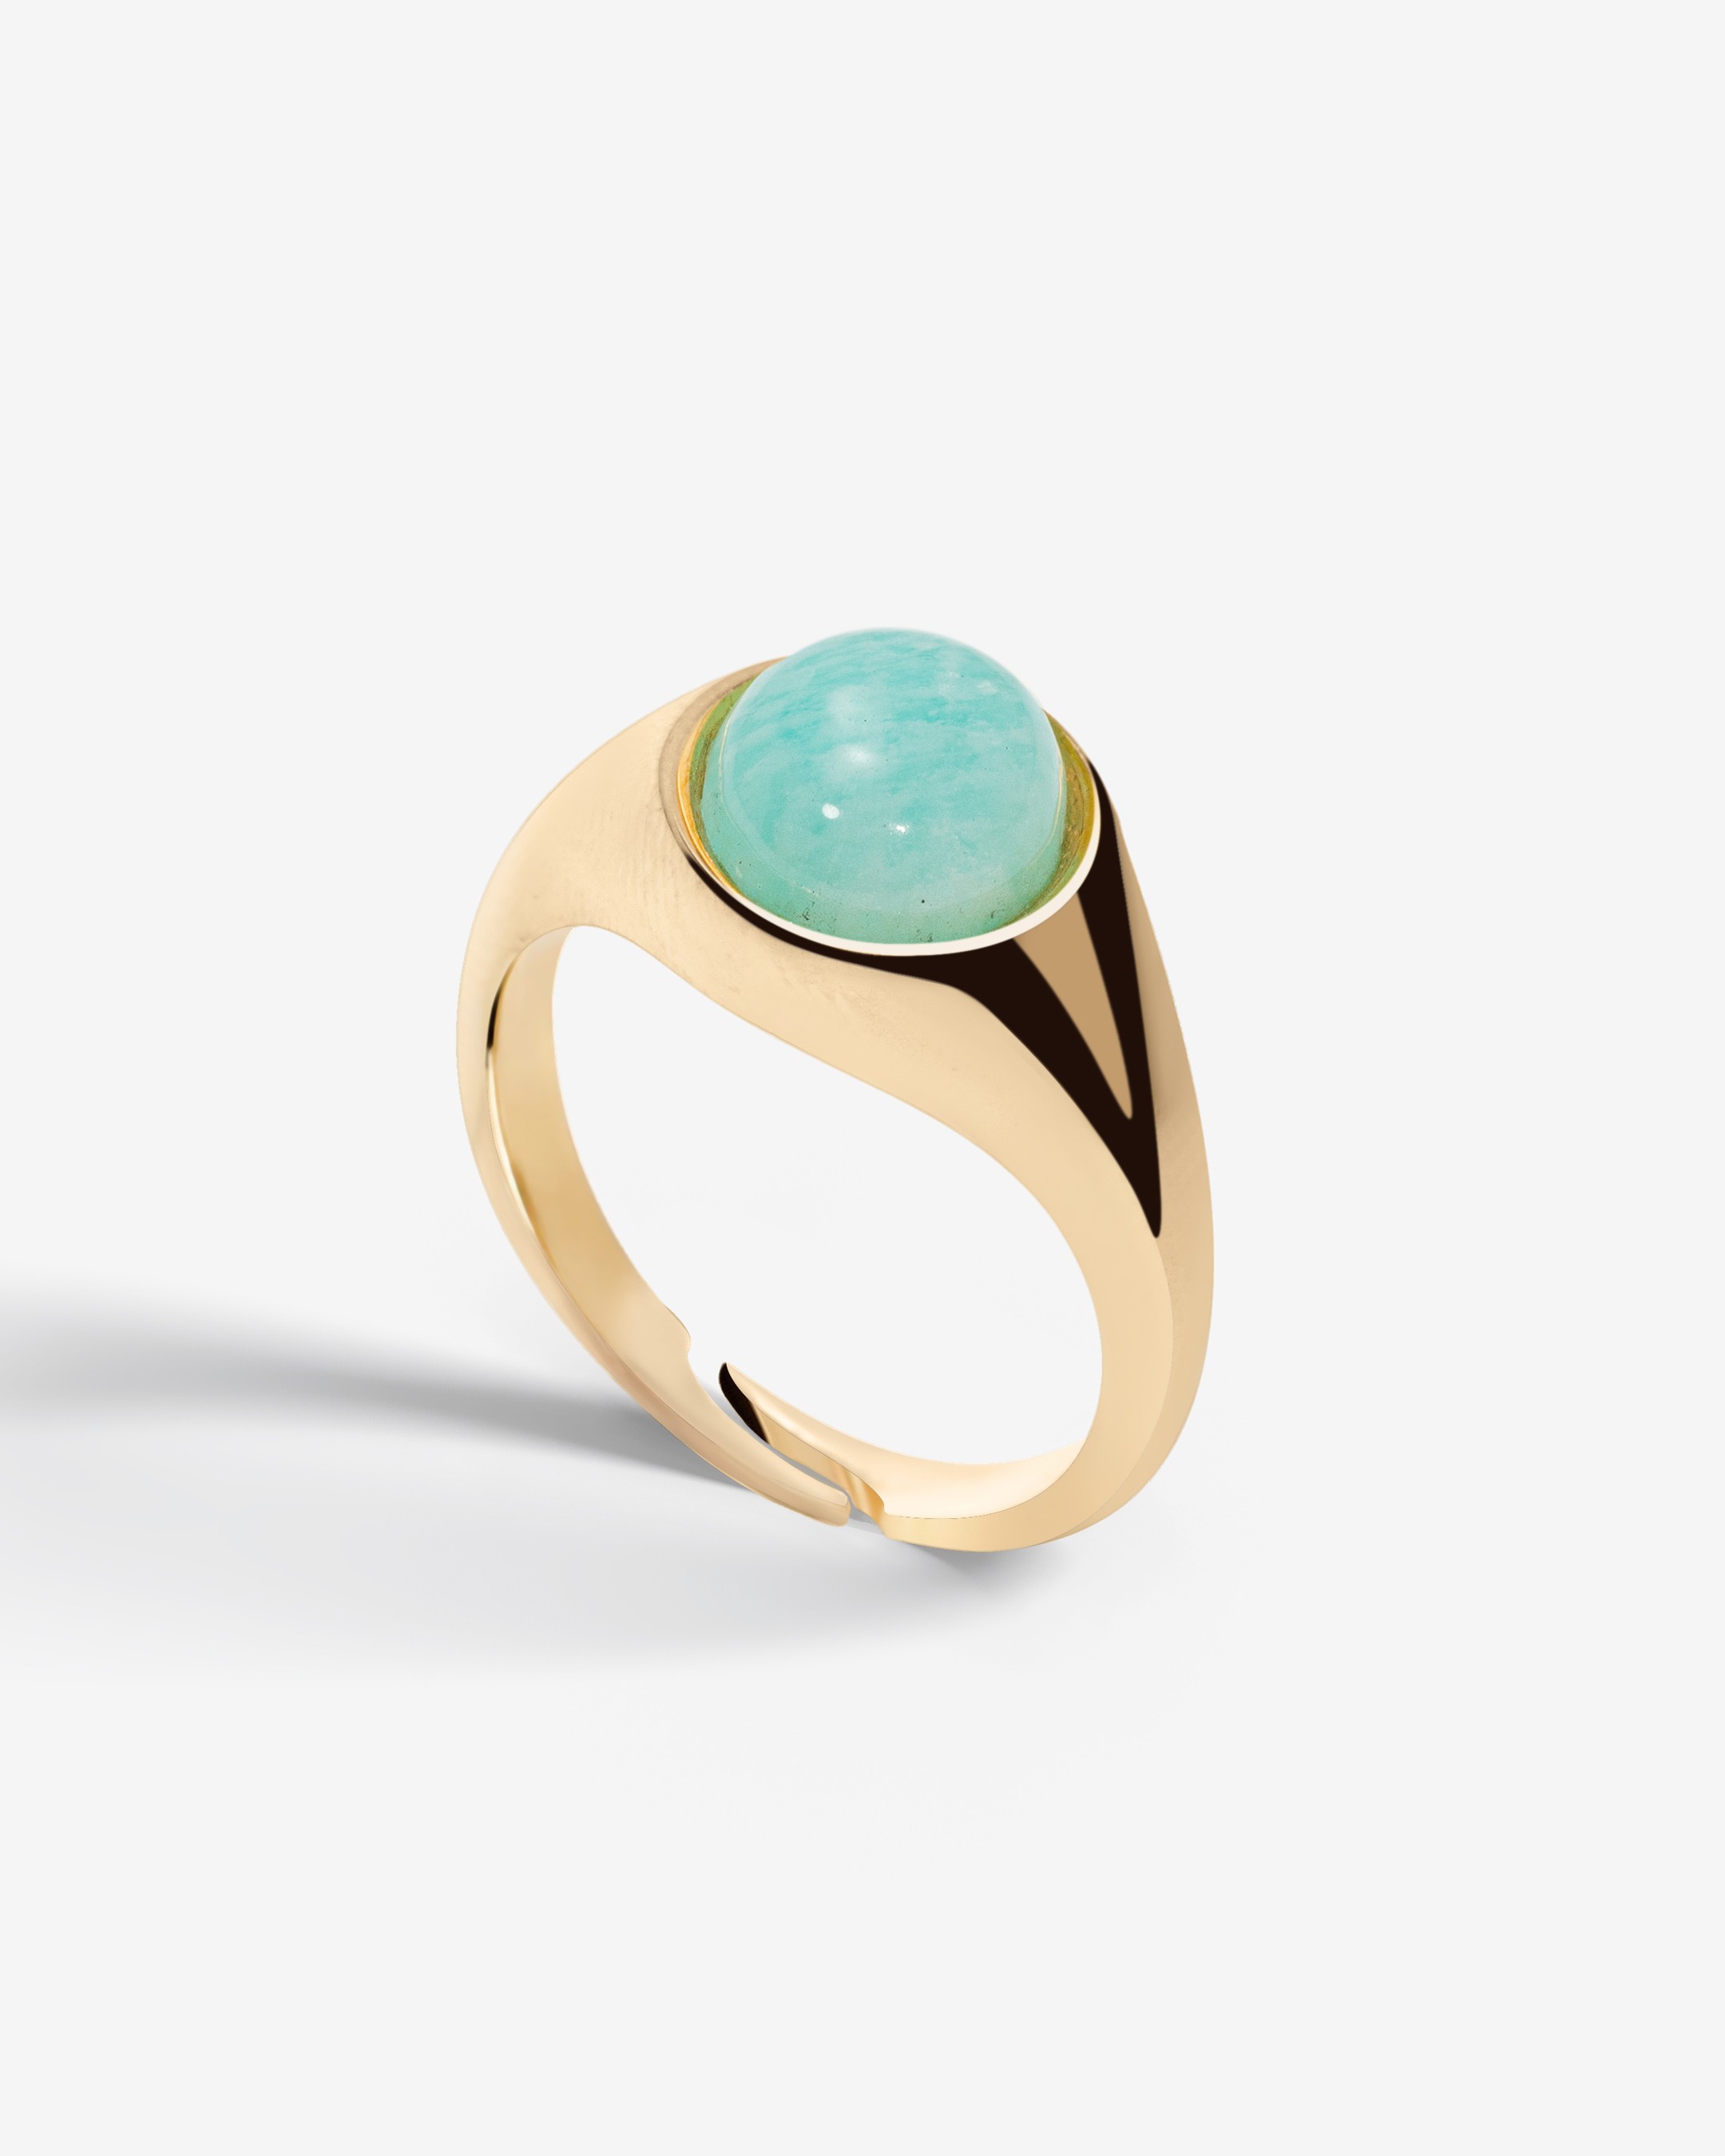 Silver Calypso Ring with Amazonite Stone - Gold